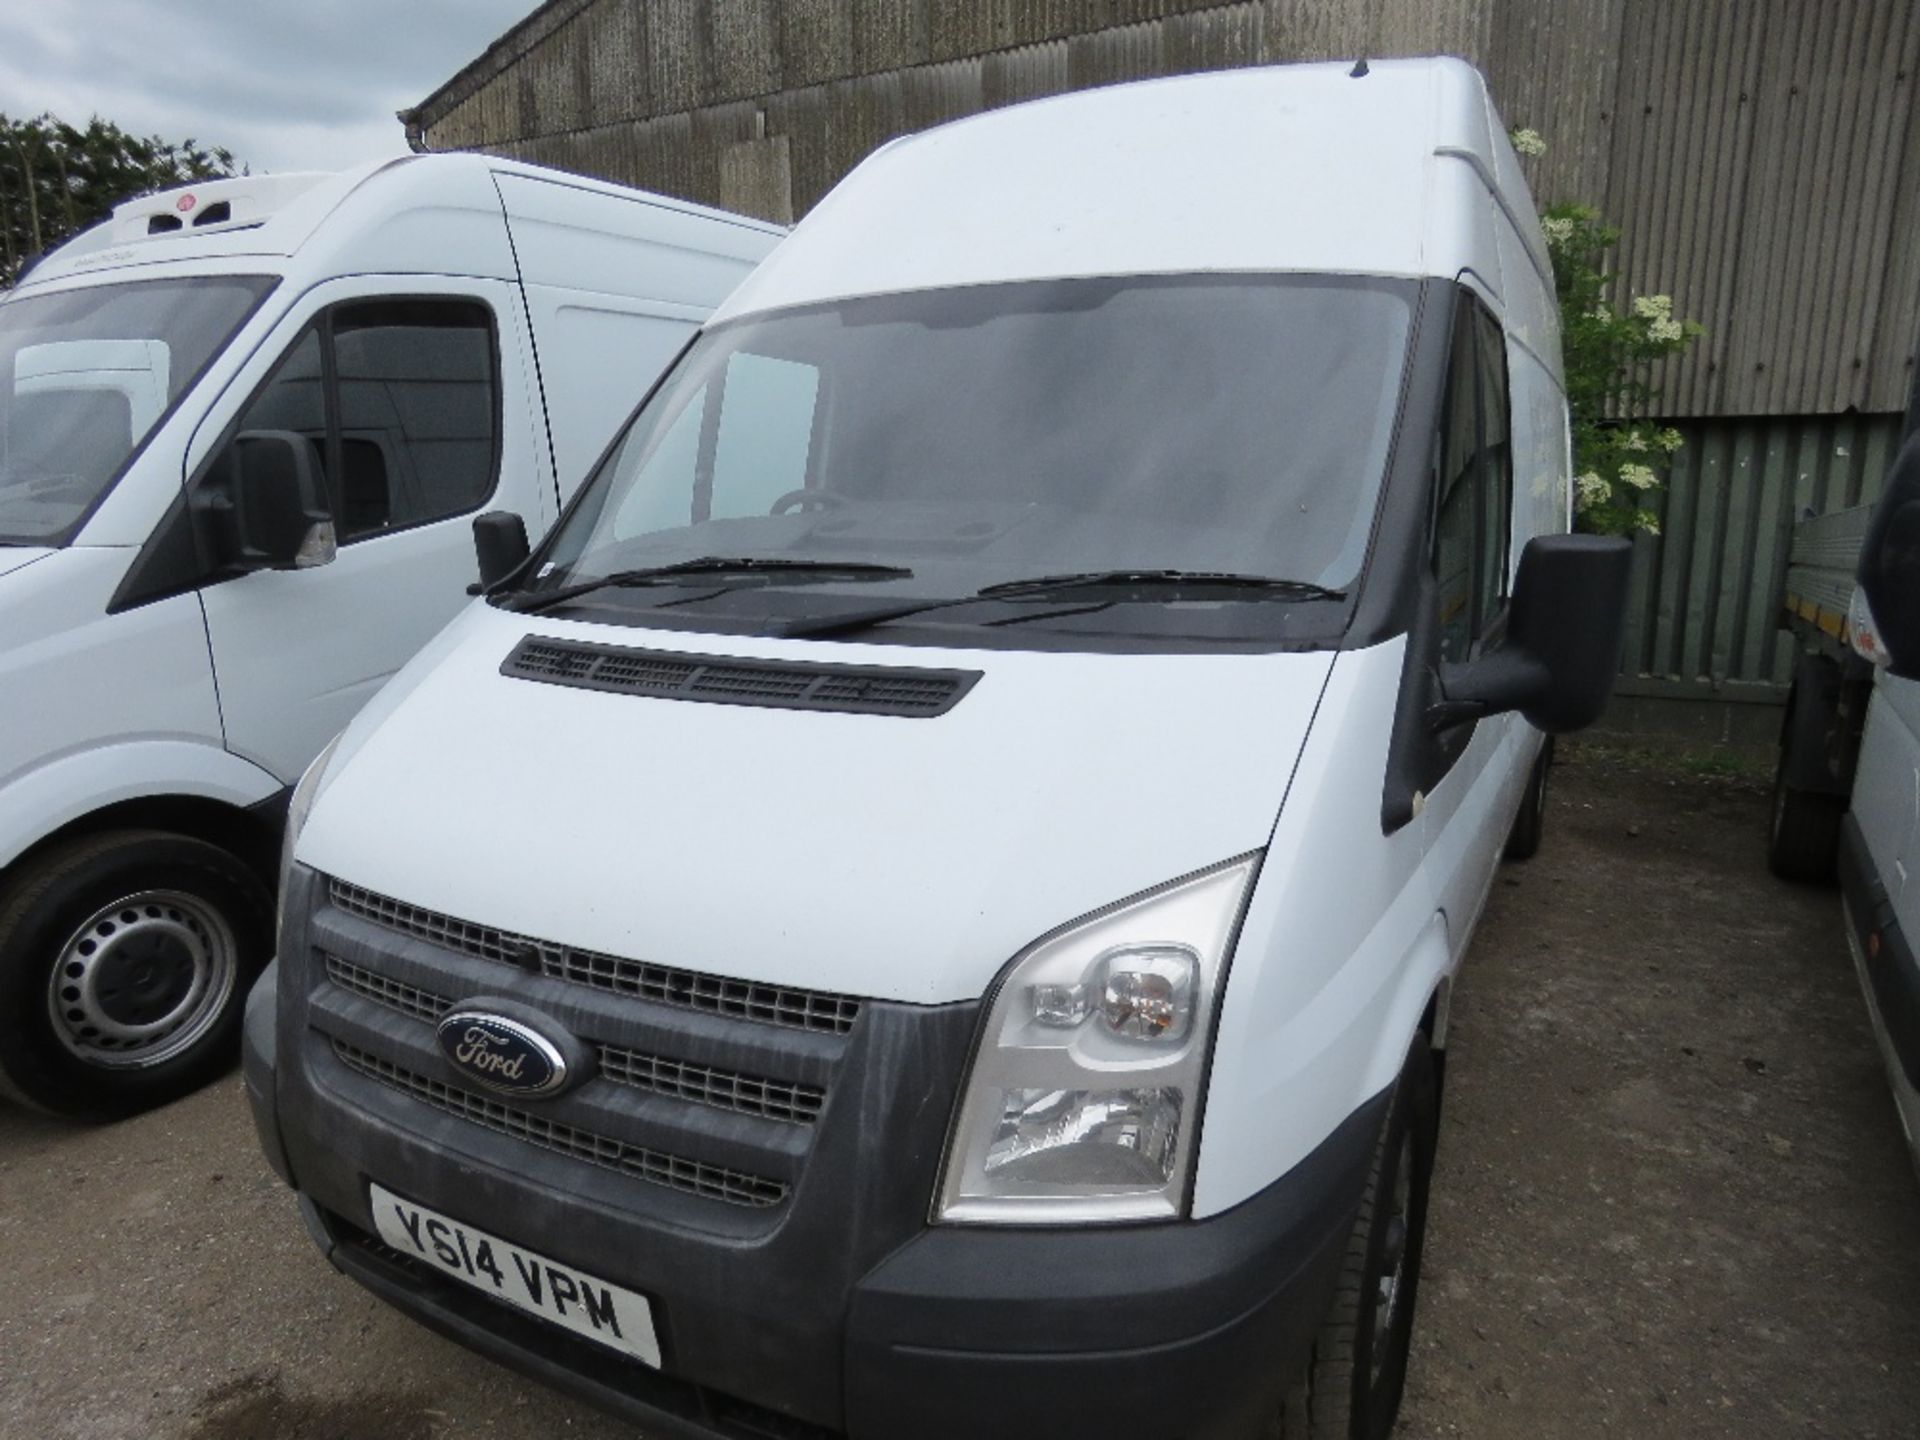 FORD TRANSIT PANEL VAN REG:YS14 VPM WITH ONBOARD COMPRESSOR AND GENERATOR. WITH V5 PLUS MOT TILL MAY - Image 2 of 10